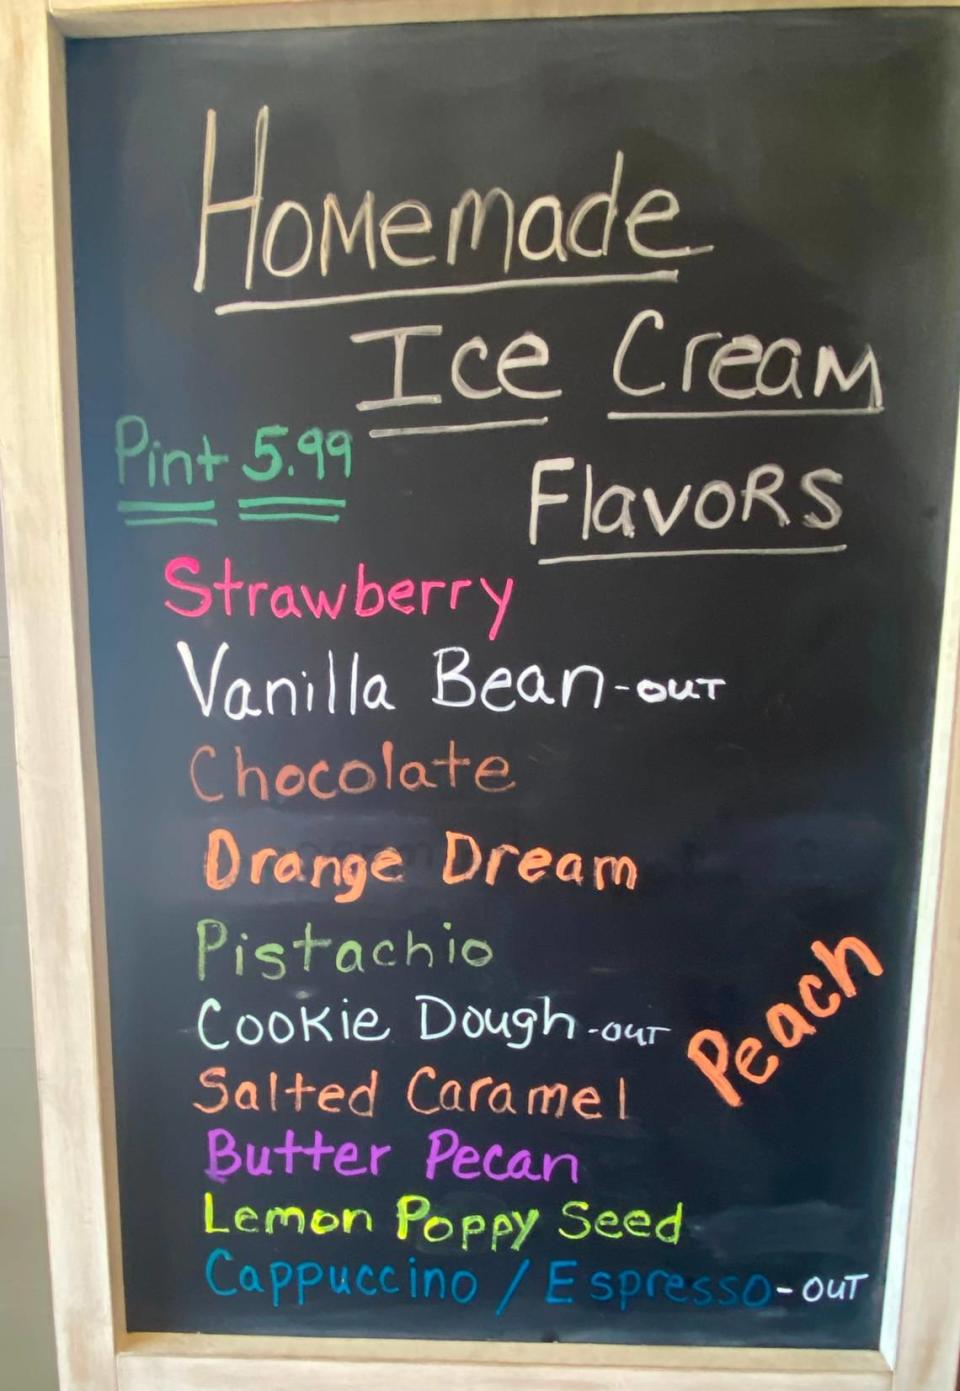 The homemade ice cream at Betty’s, which is sold by the pint, has almost become its own business, the owners say. People buy it as fast as they can make it.